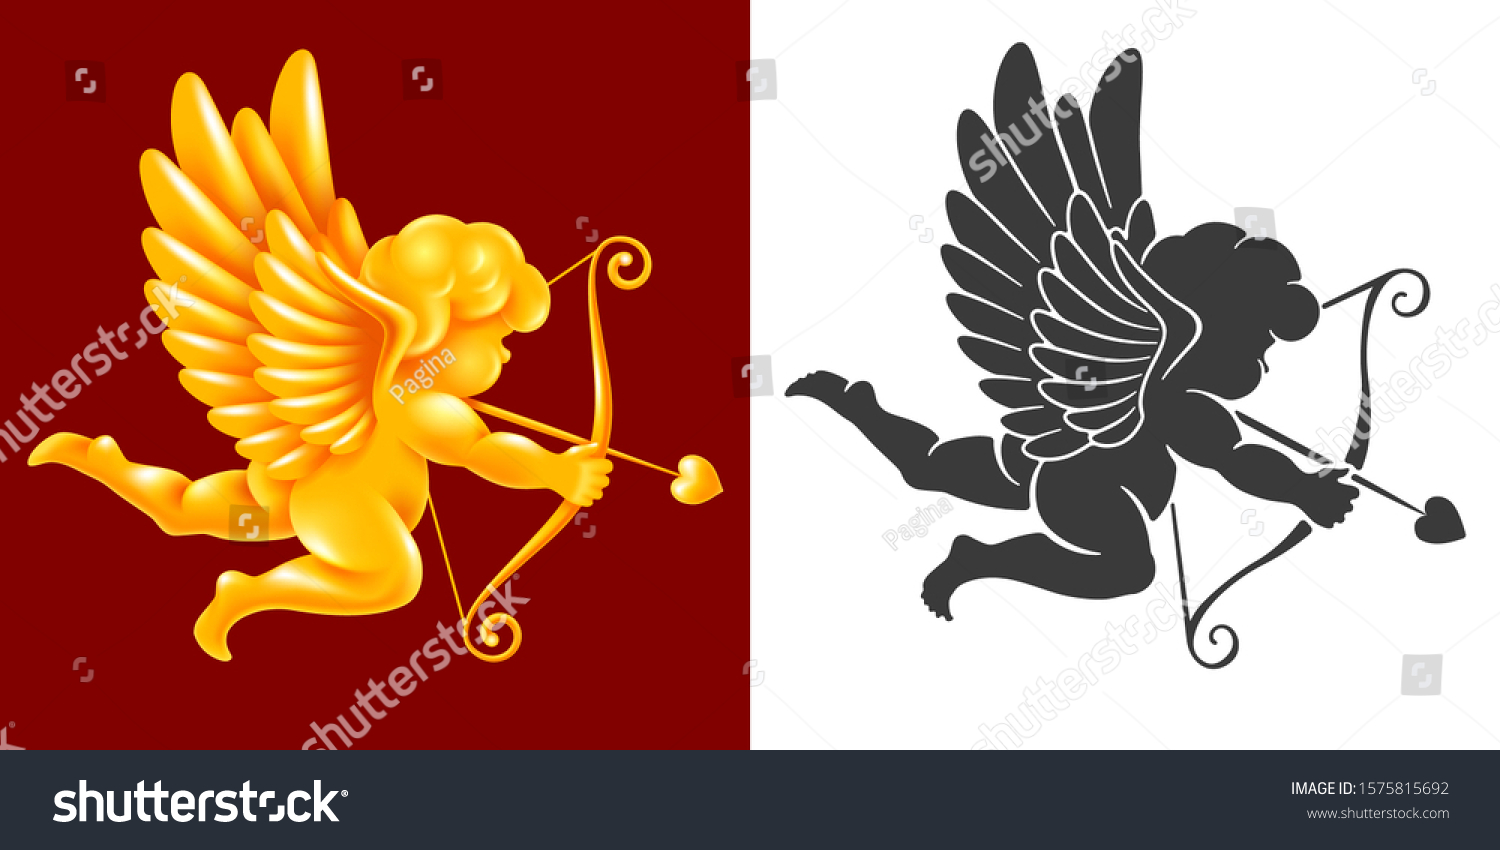 SVG of Angel or Cupid cherub, god of love, with a wings, bow and arrow. Monochrome black silhouette and volumetric golden figure in the set. Amur aiming in hearts of lovers. Vector illustration. svg